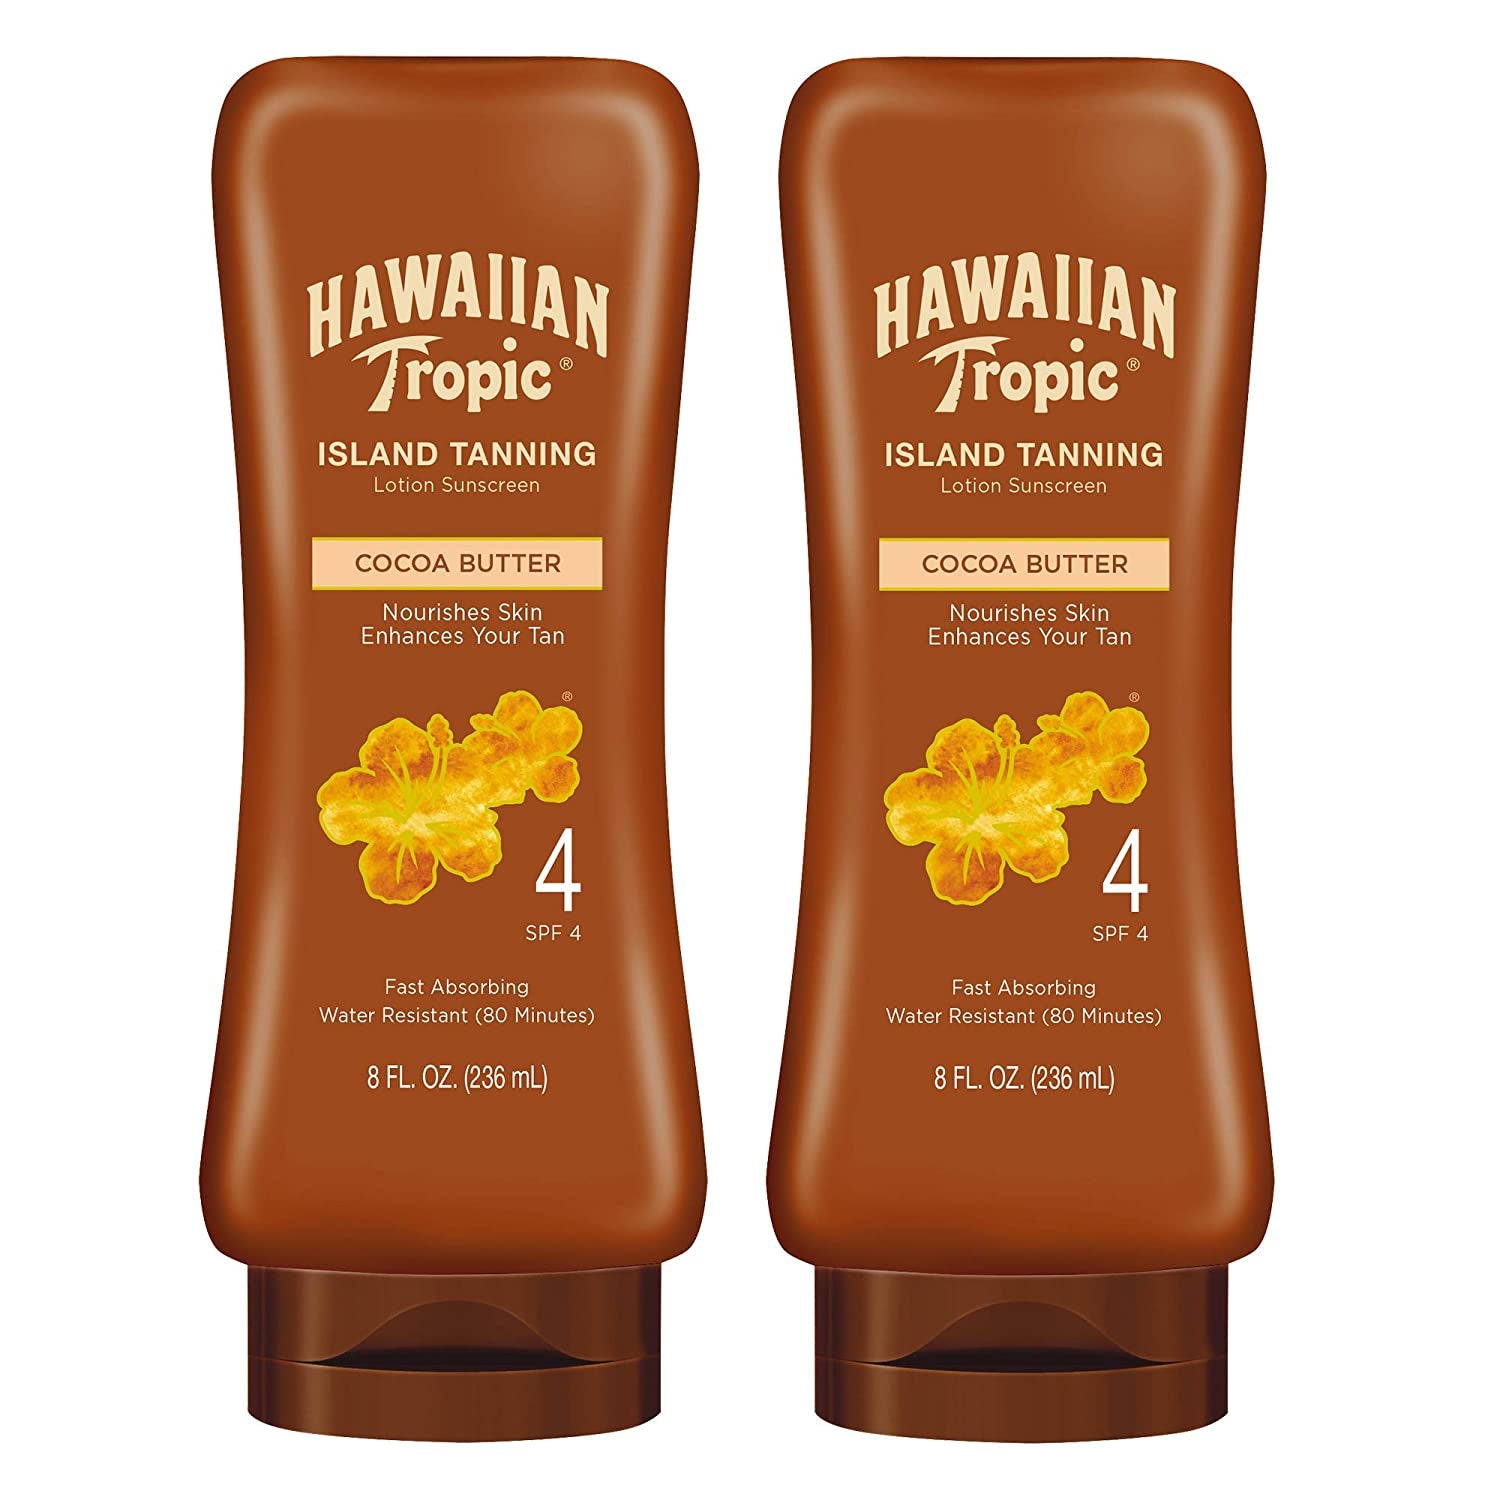 "Sun-Kissed Glow Twin Pack: Hawaiian Tropic Dark Tanning Oil with Cocoa Butter & Coconut Oil"